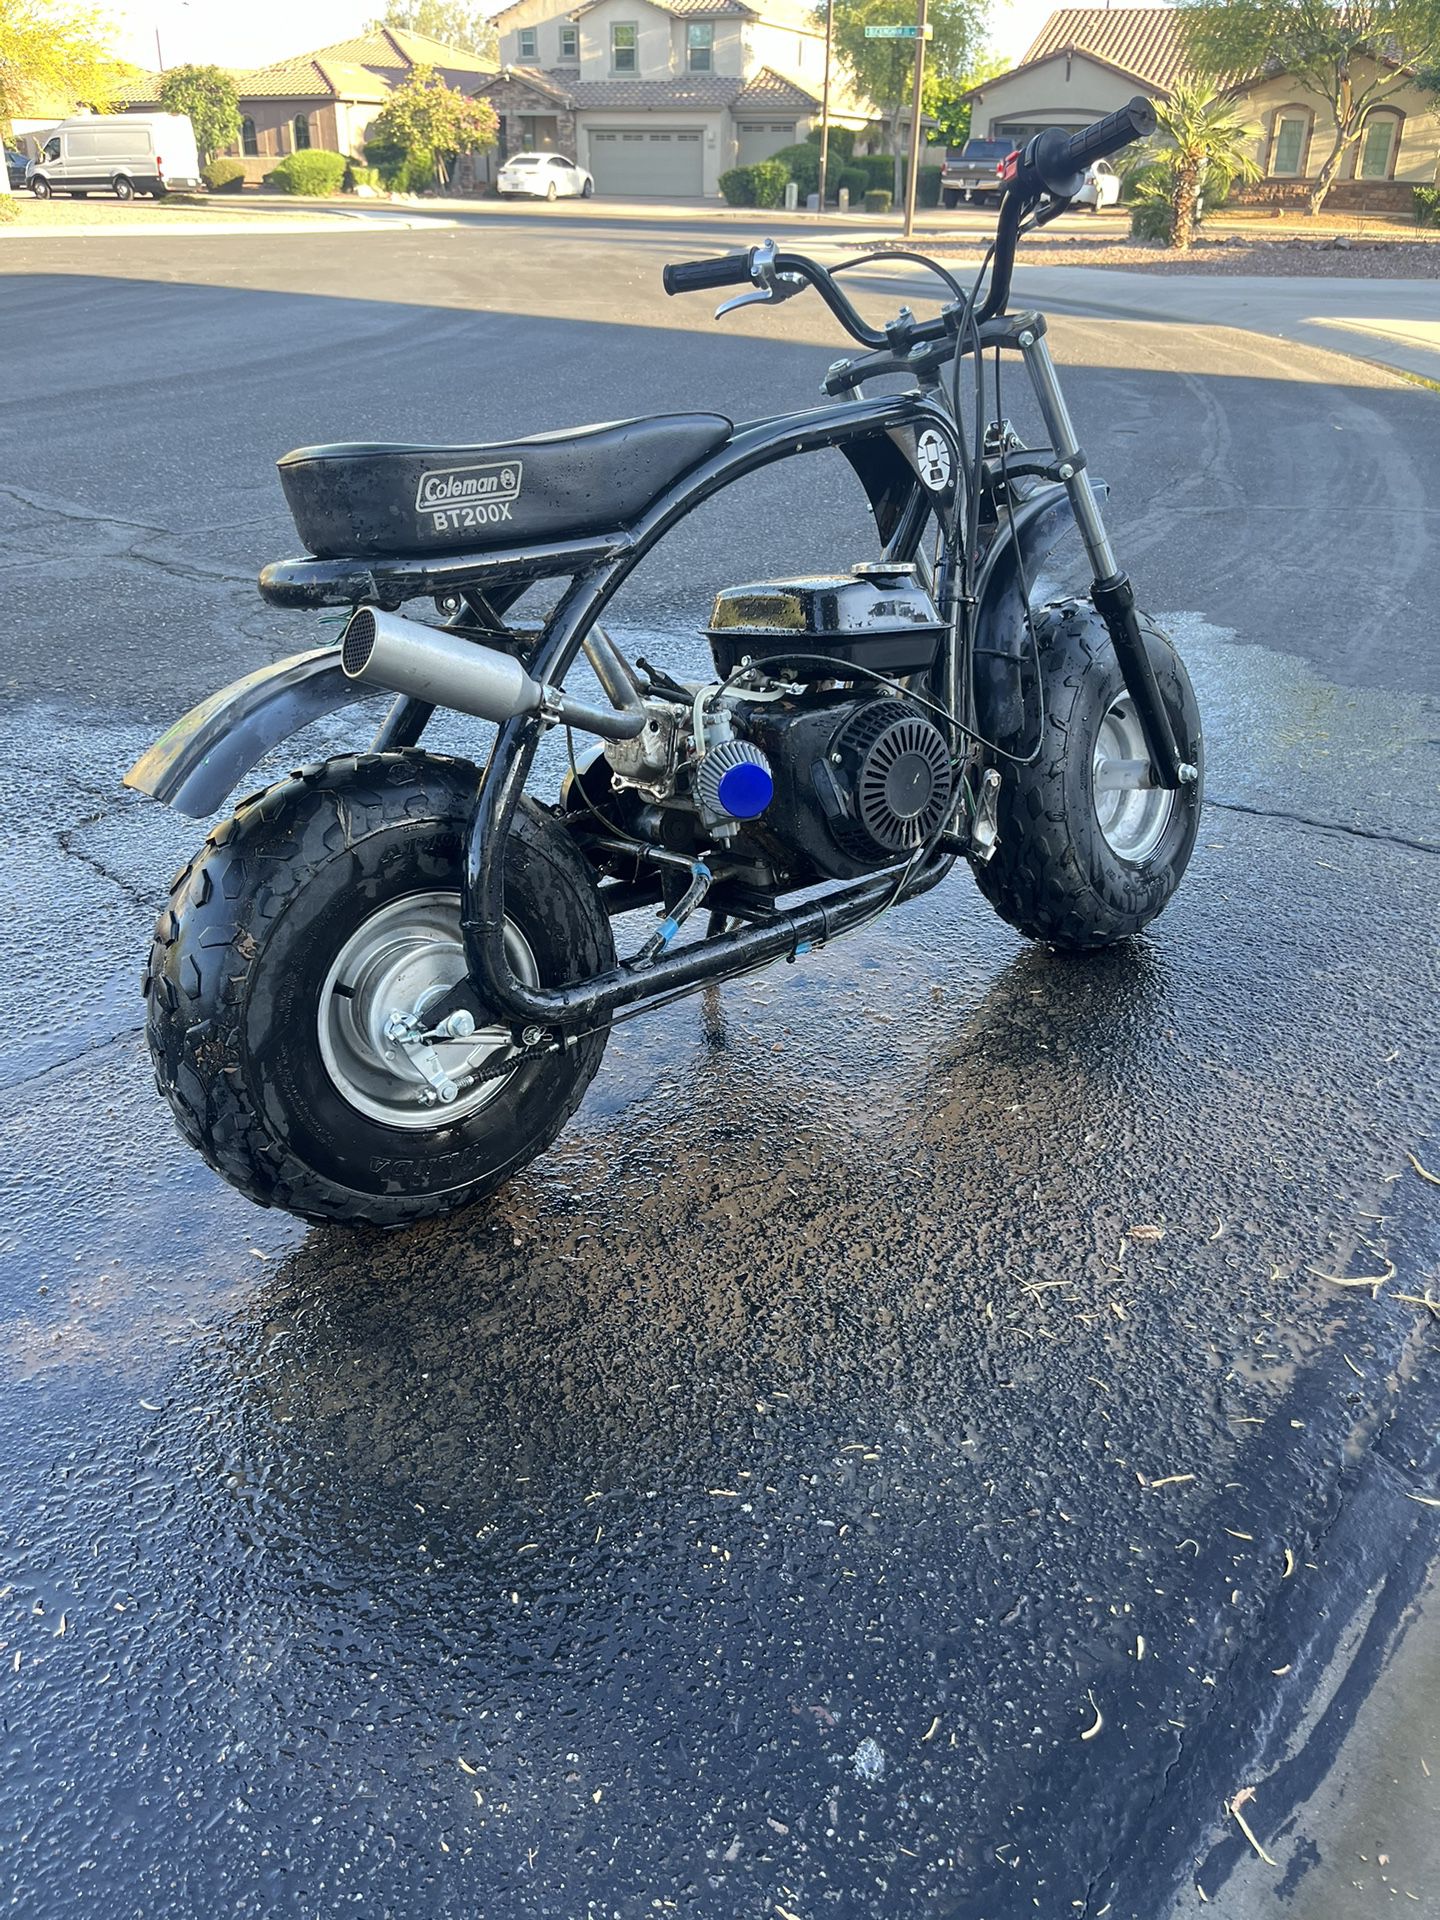 Mini Bike Upgraded Coleman BT200X (Open To Trades Looking For Pit Bike)